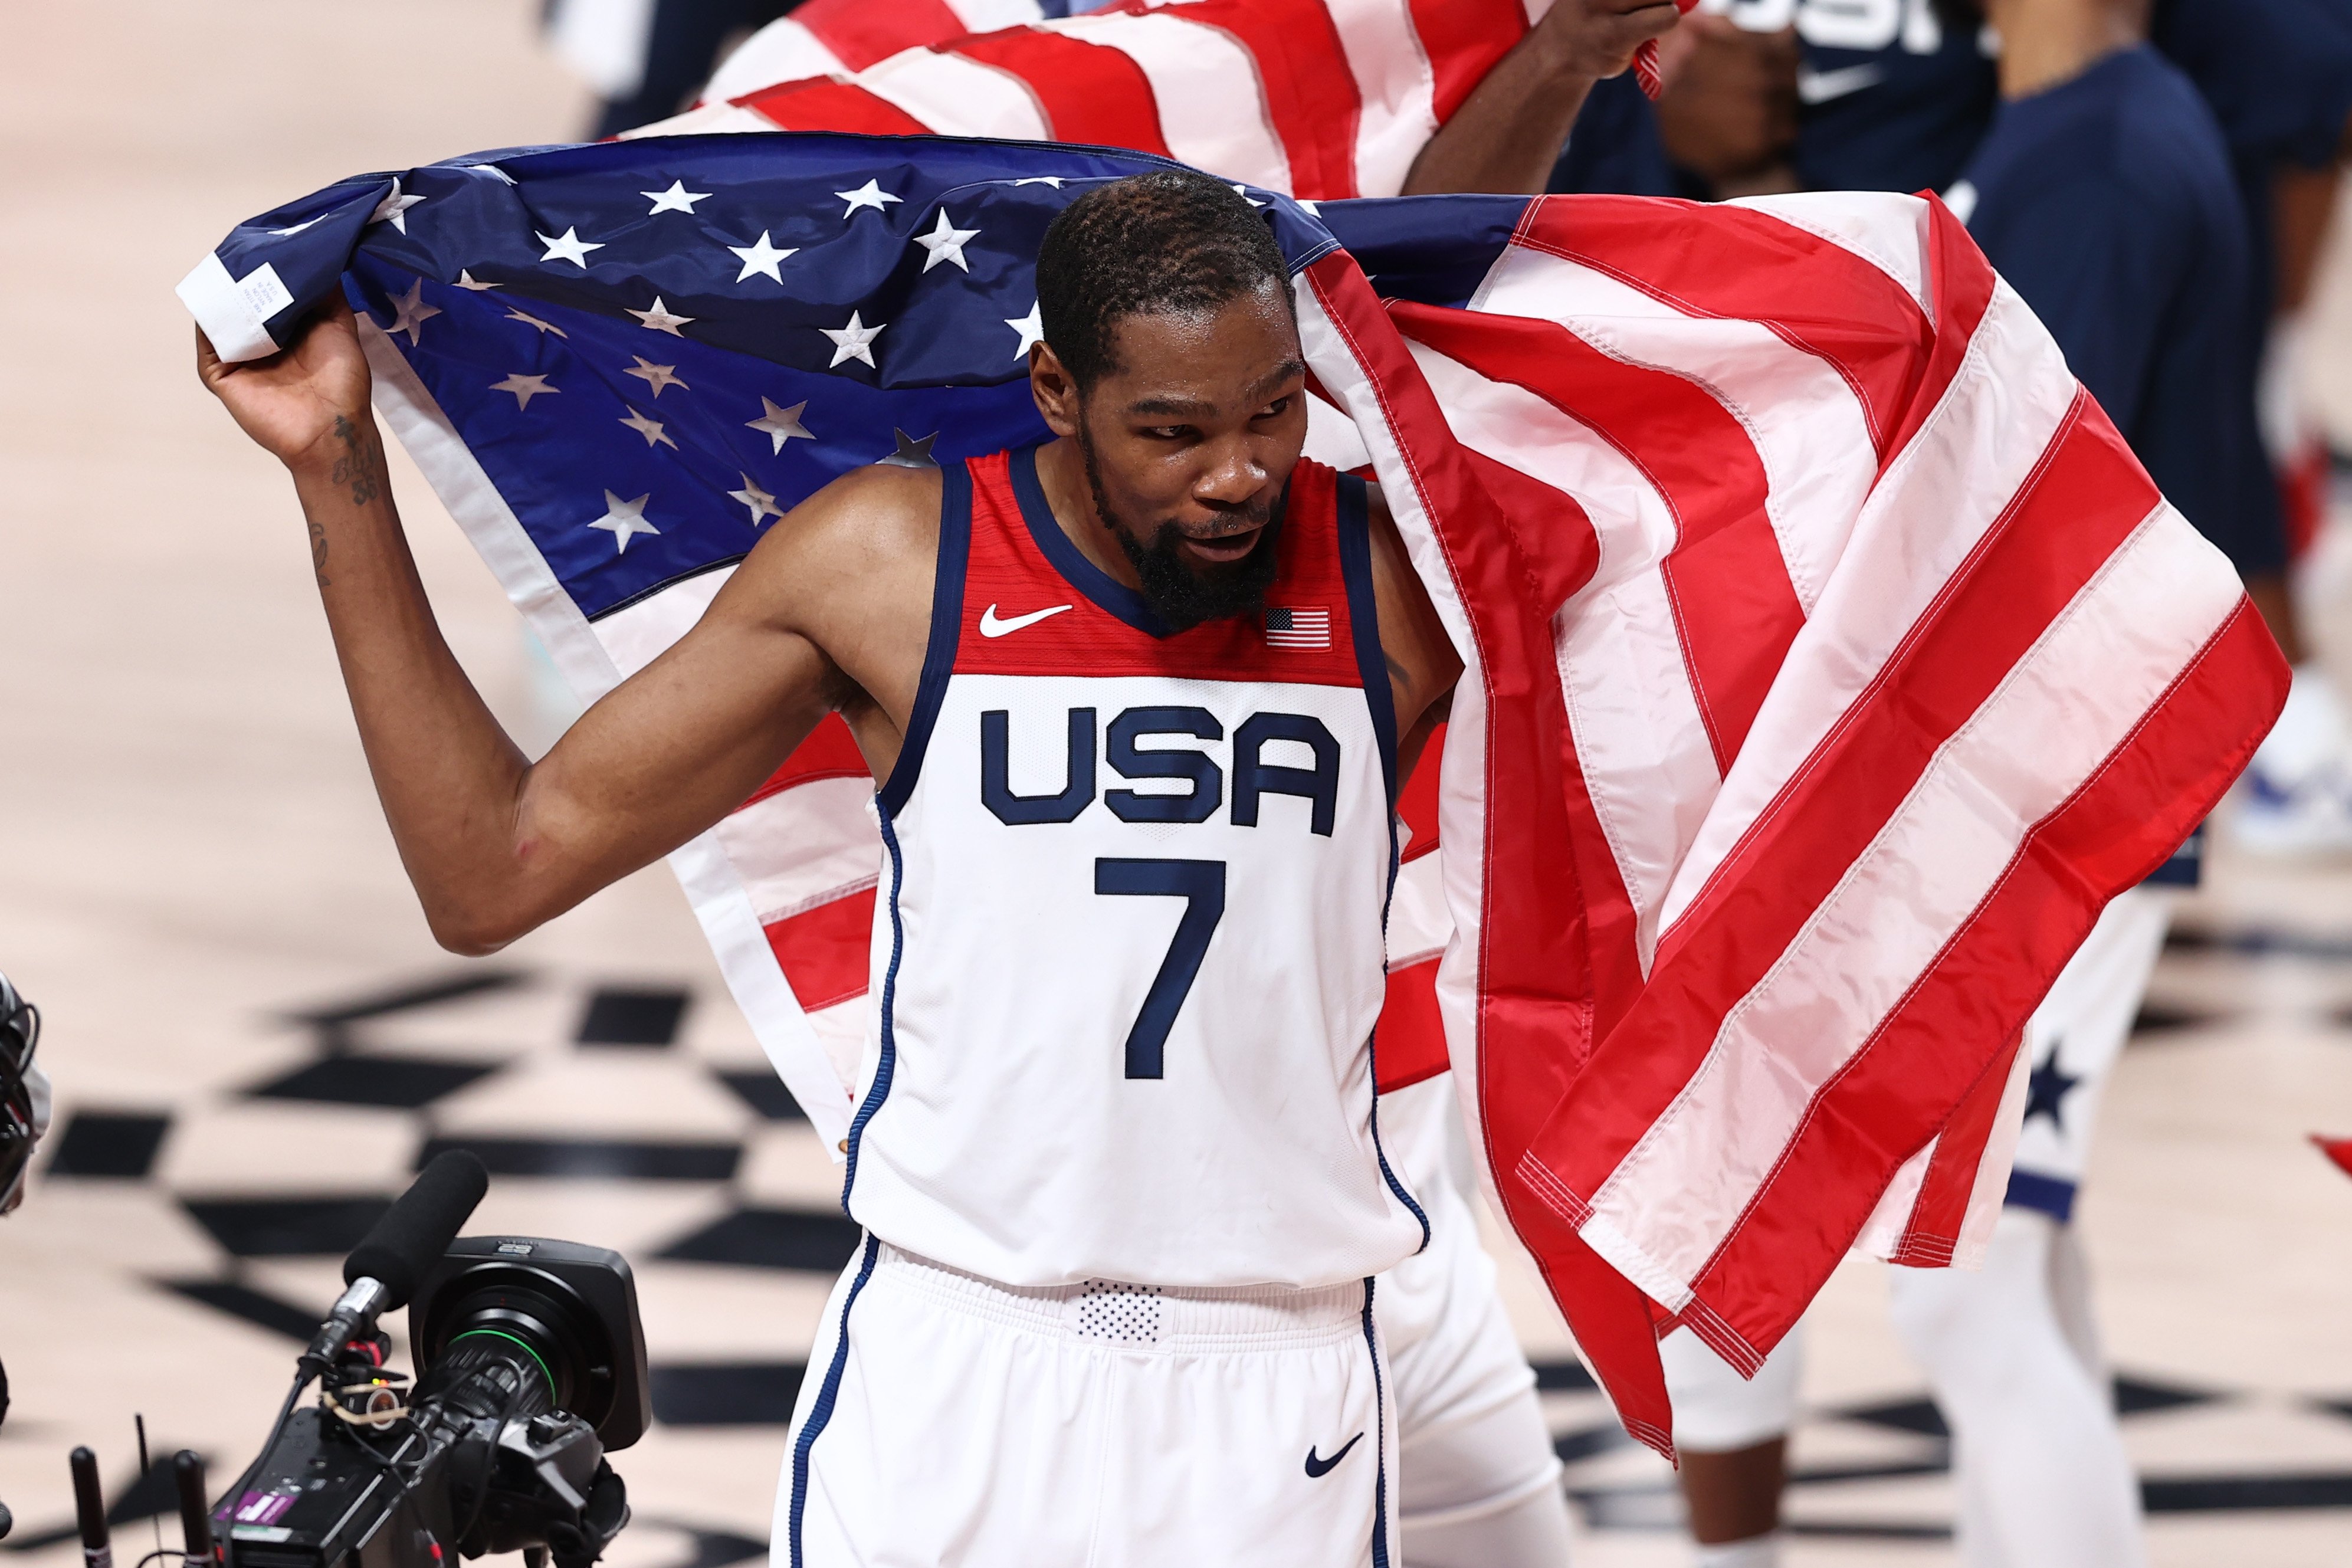 Team USA&#039;s Kevin Durant holds a flag after the game against the France Men&#039;s National Team during the Gold Medal Game of the 2020 Tokyo Olympics, at the Super Saitama Arena, Tokyo, Japan, Aug. 7, 2021. (Getty Images Photo)